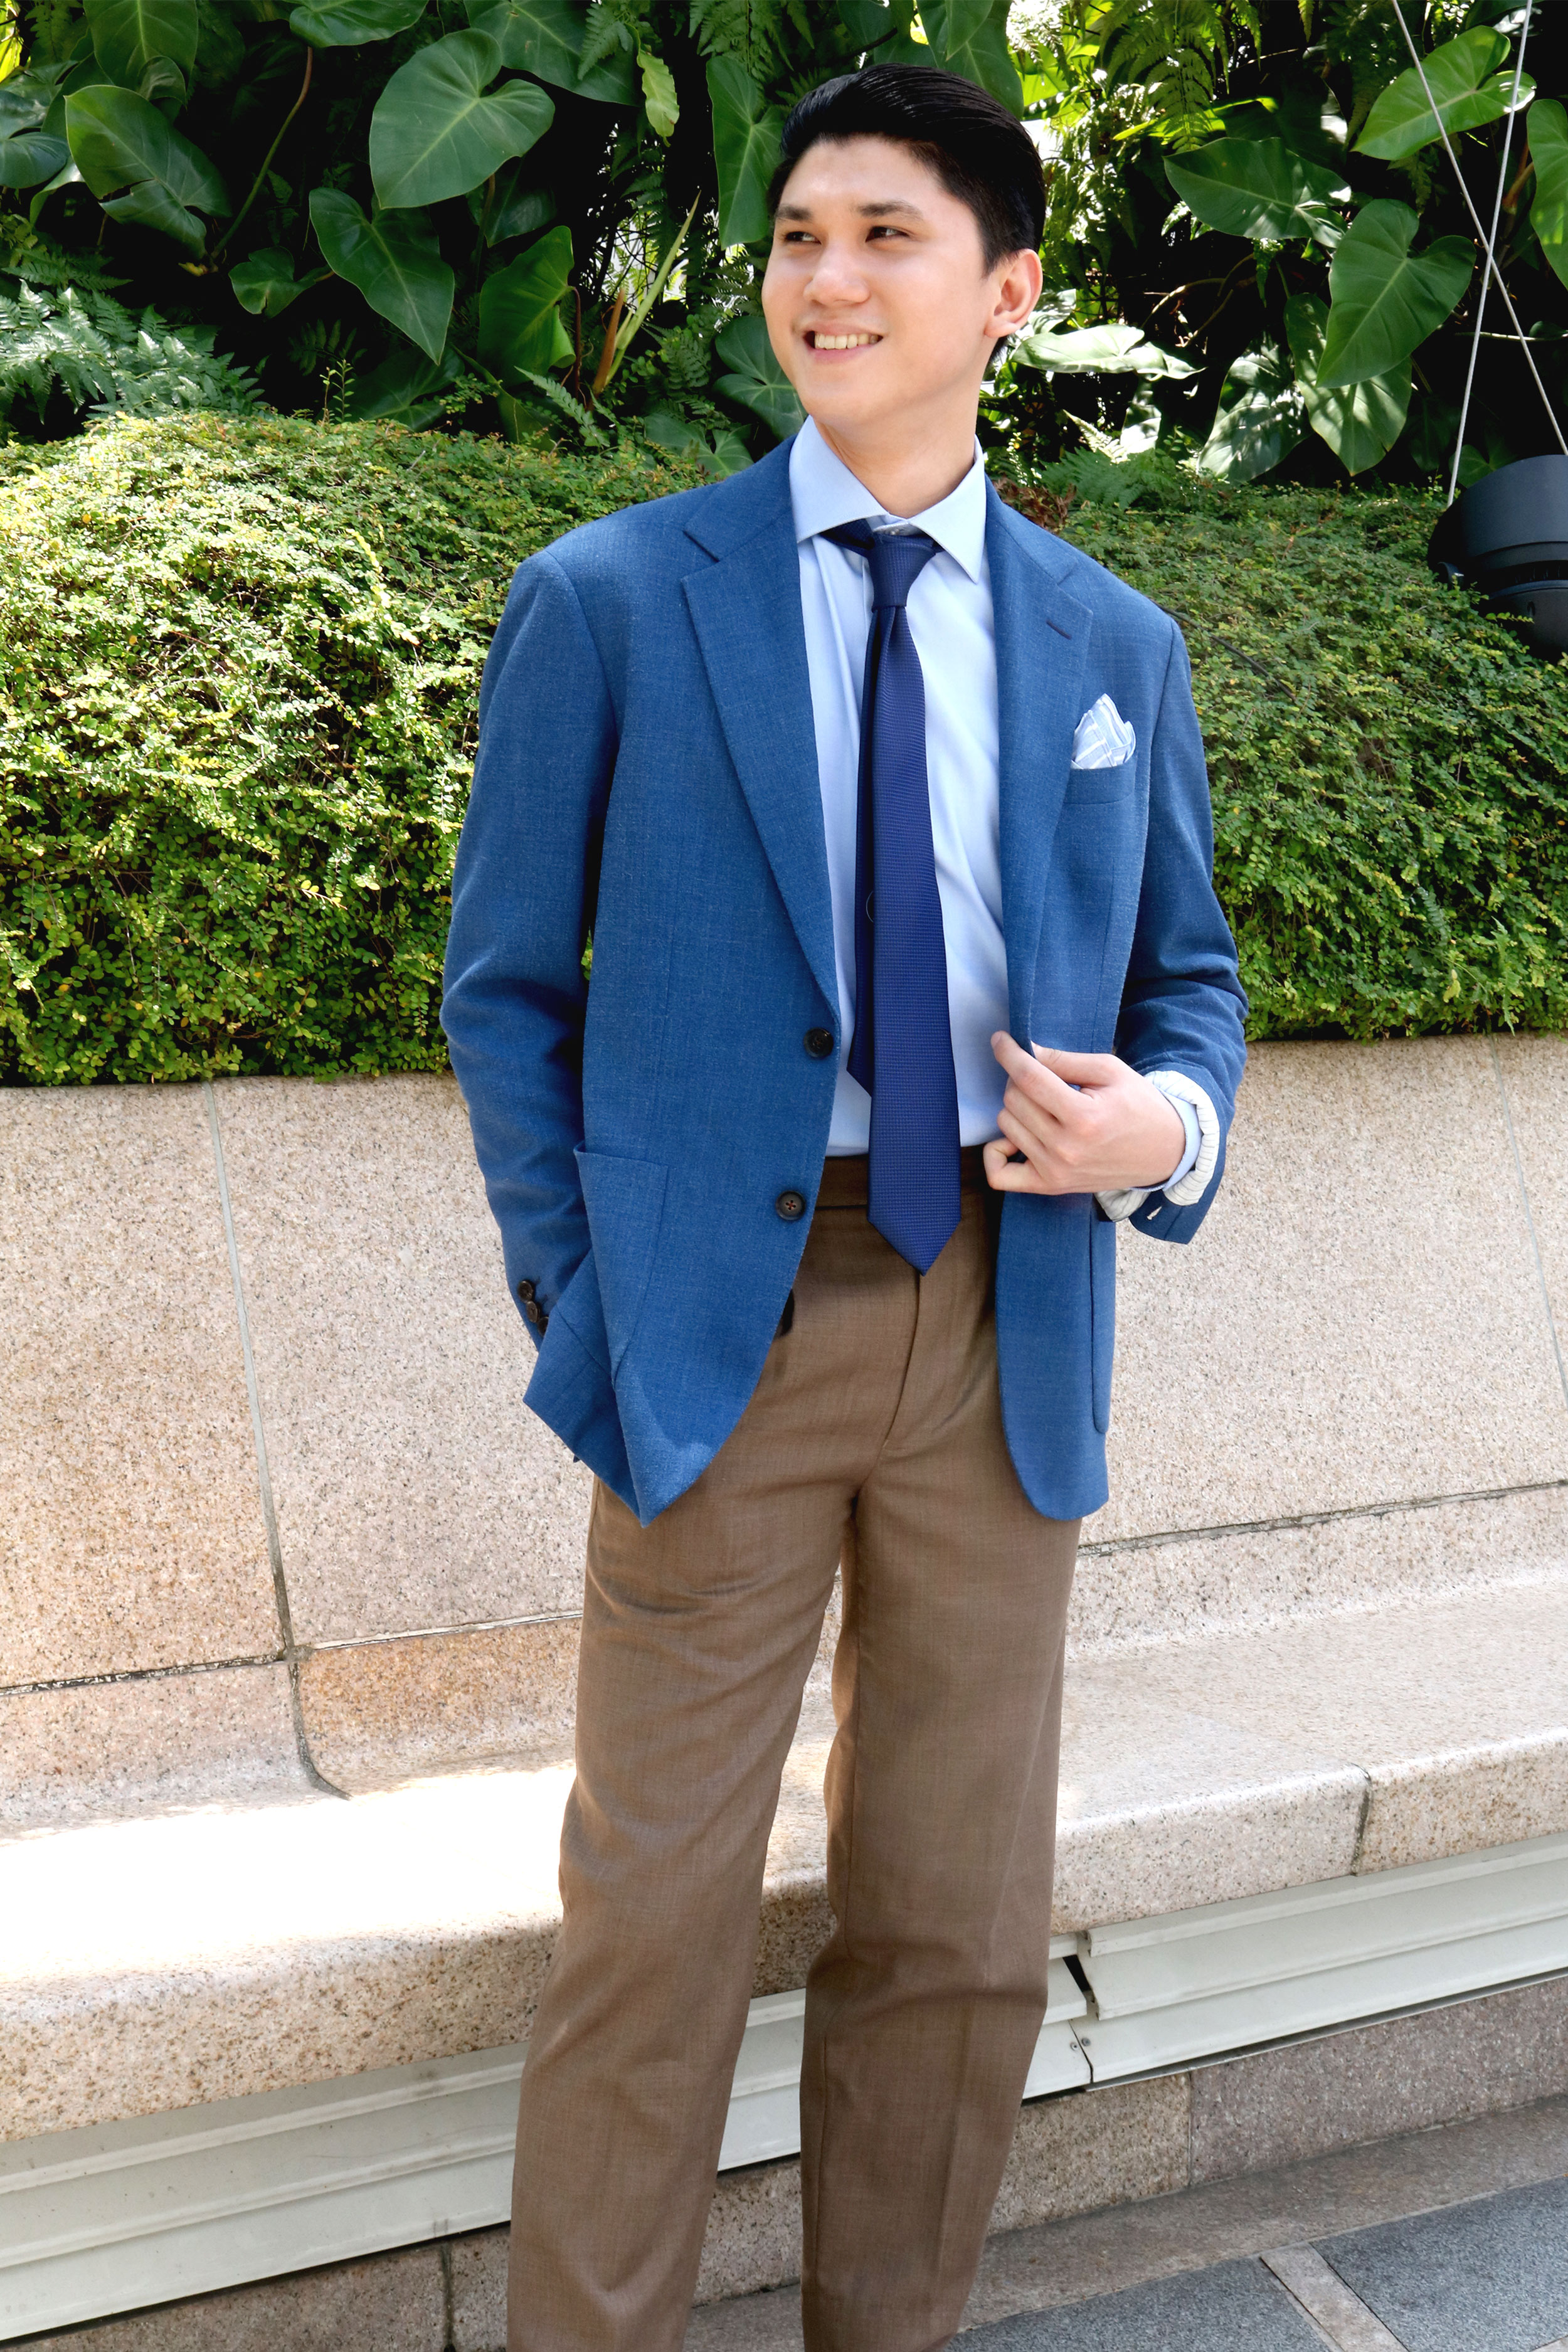 Model in Loro Piana's Tasmanian Broken Suit With Blue Business Shirt and Tie